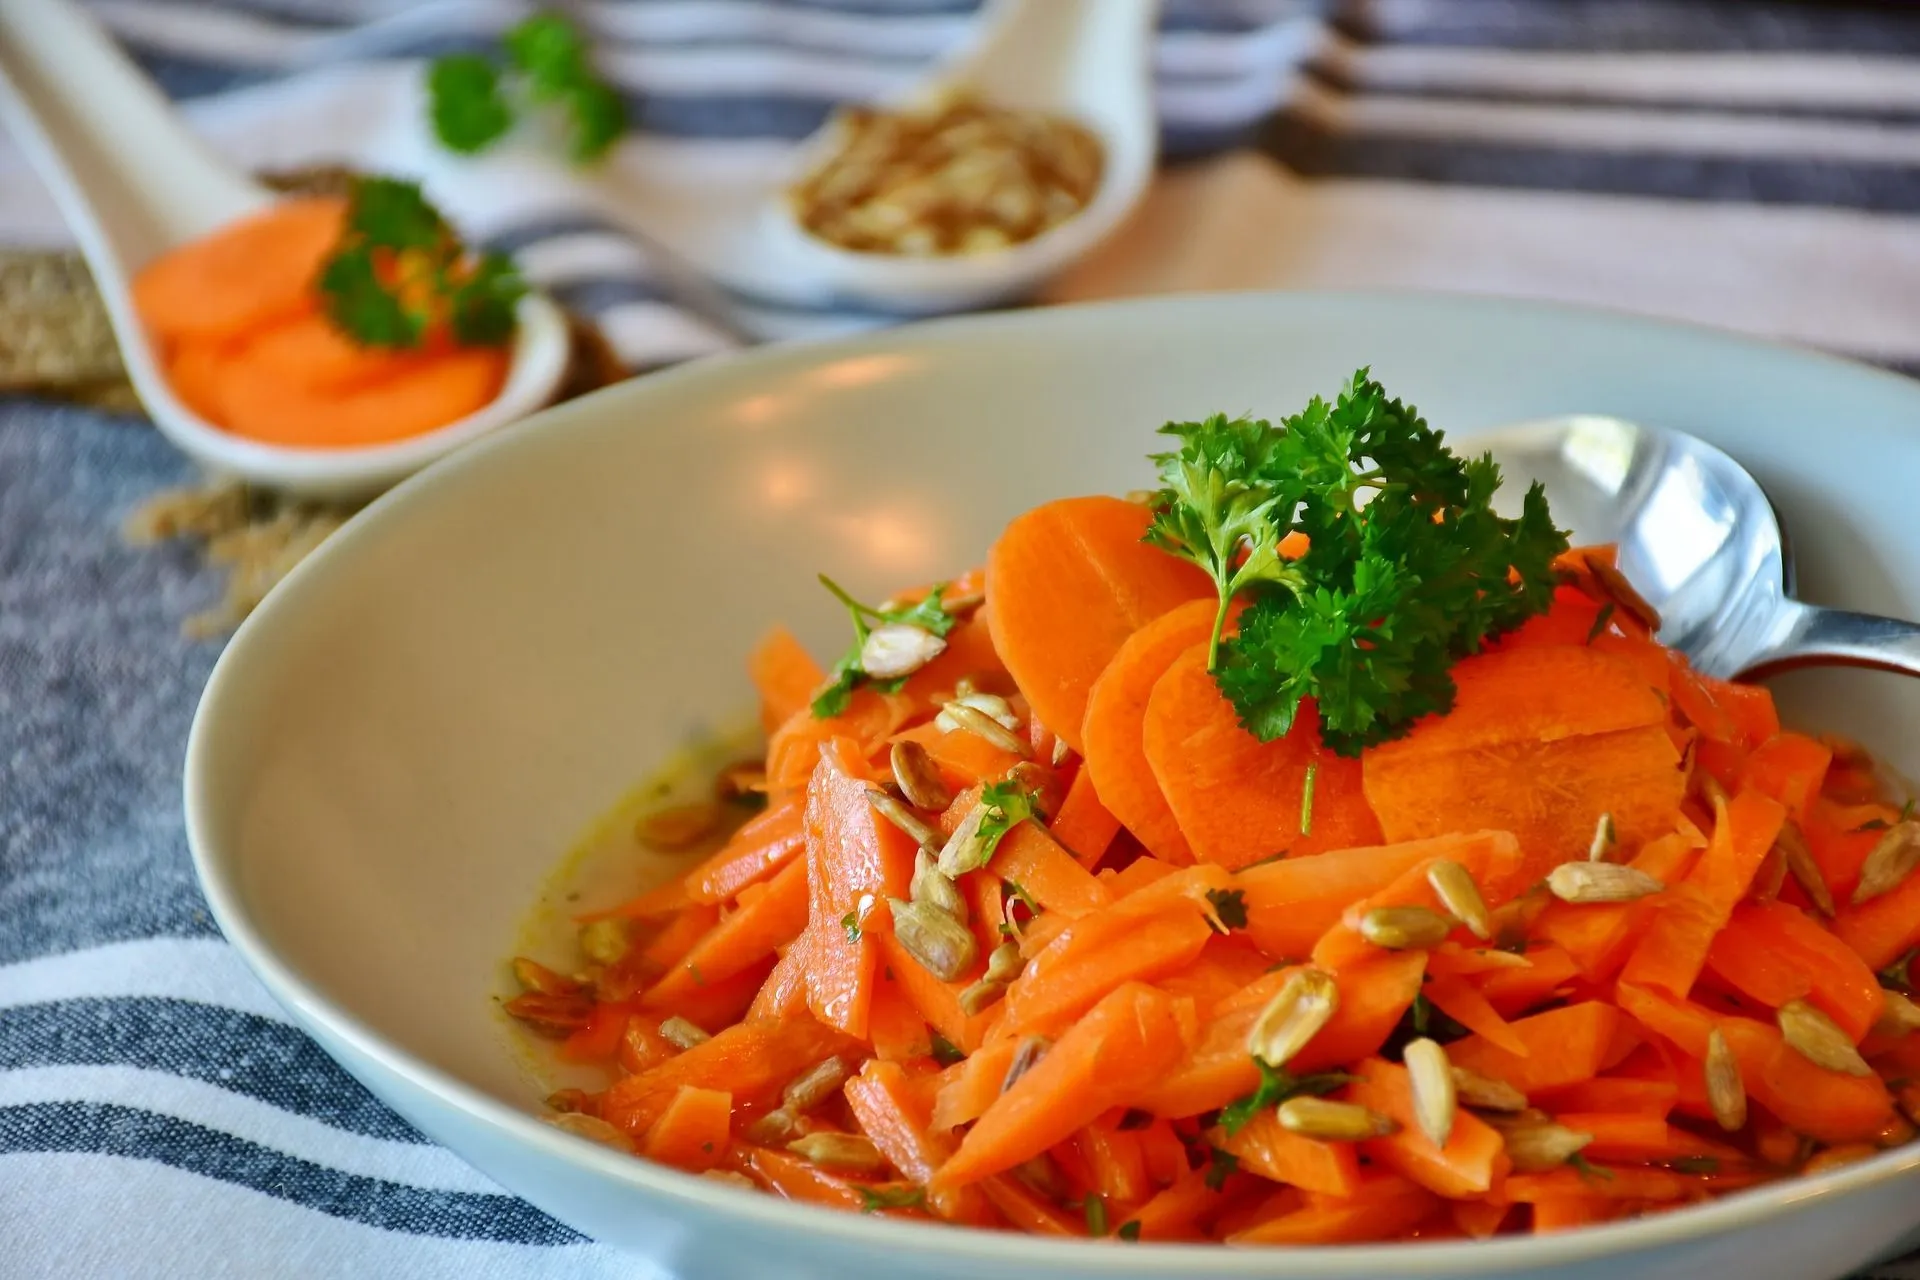 Carrot salad is a dish familiar to many cultures.